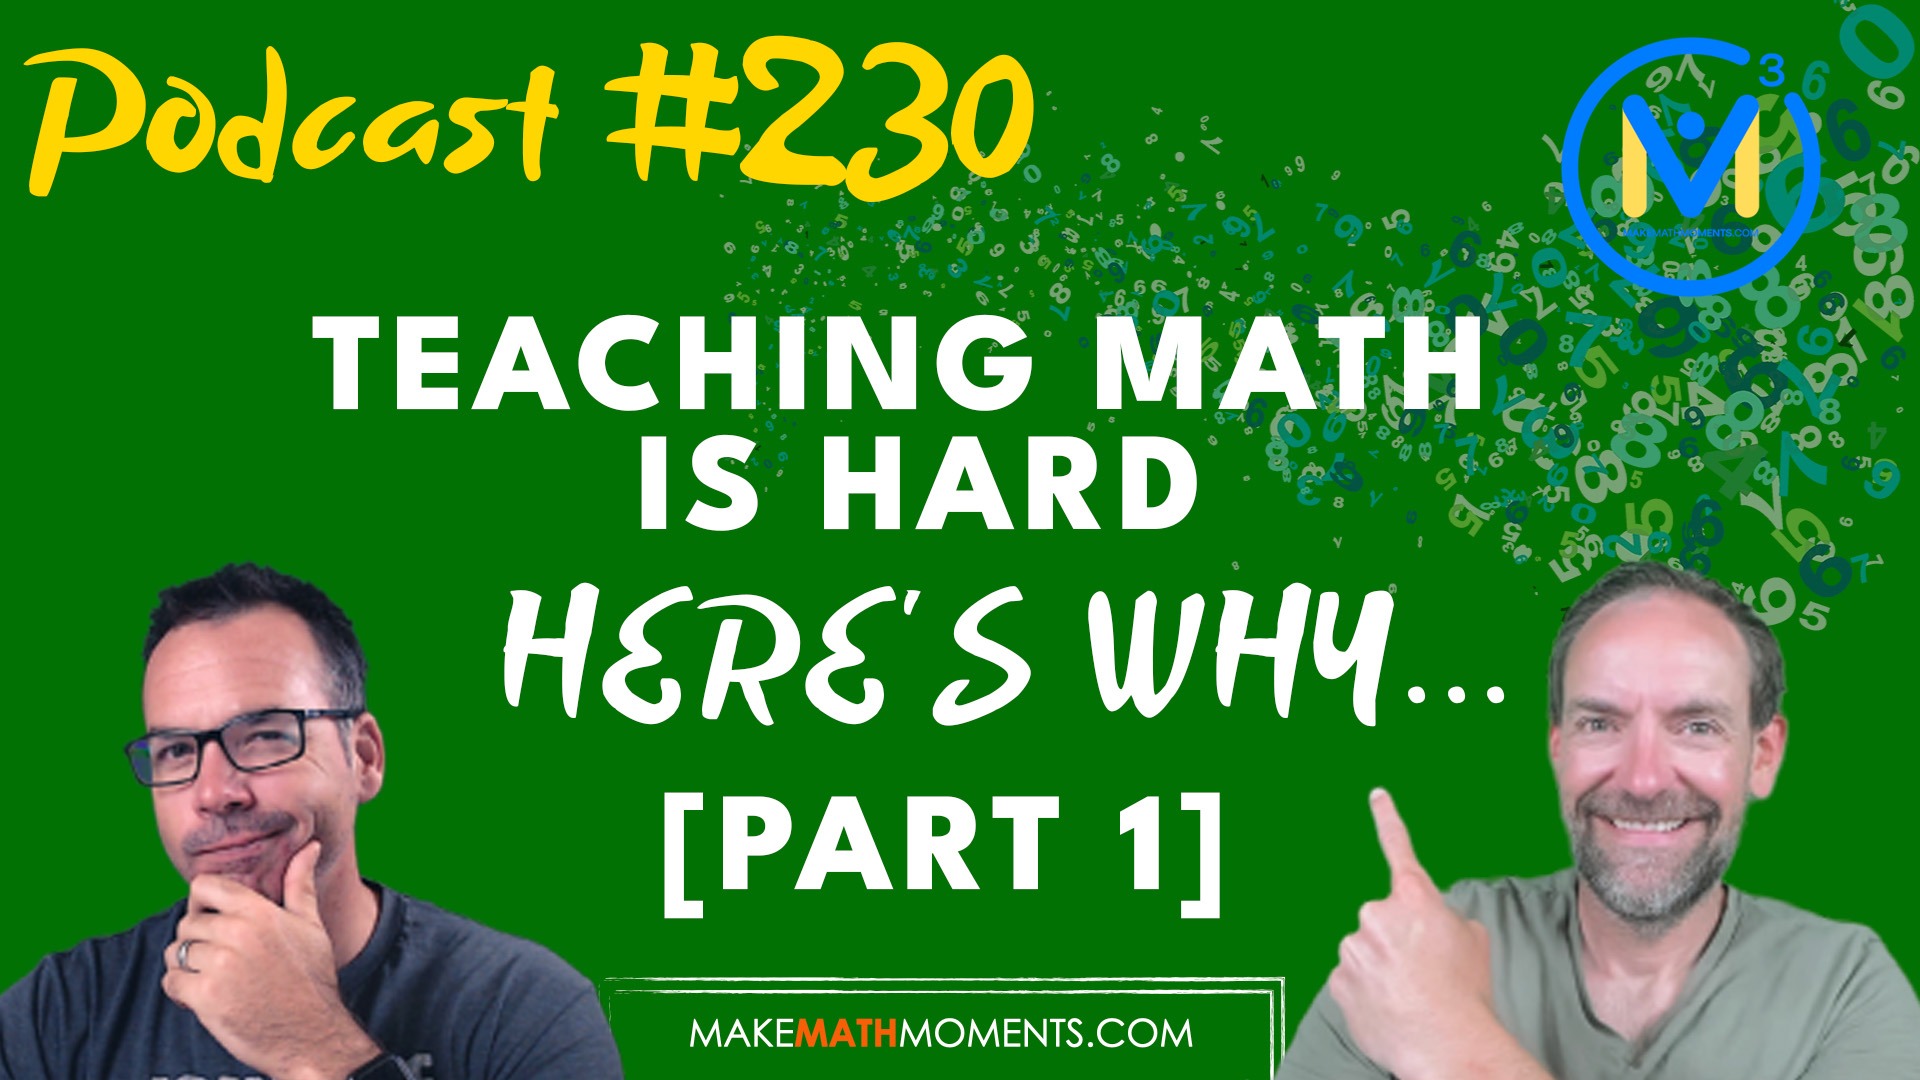 Episode 230: Teaching Math Is Hard. Here’s Why… [Part 1]